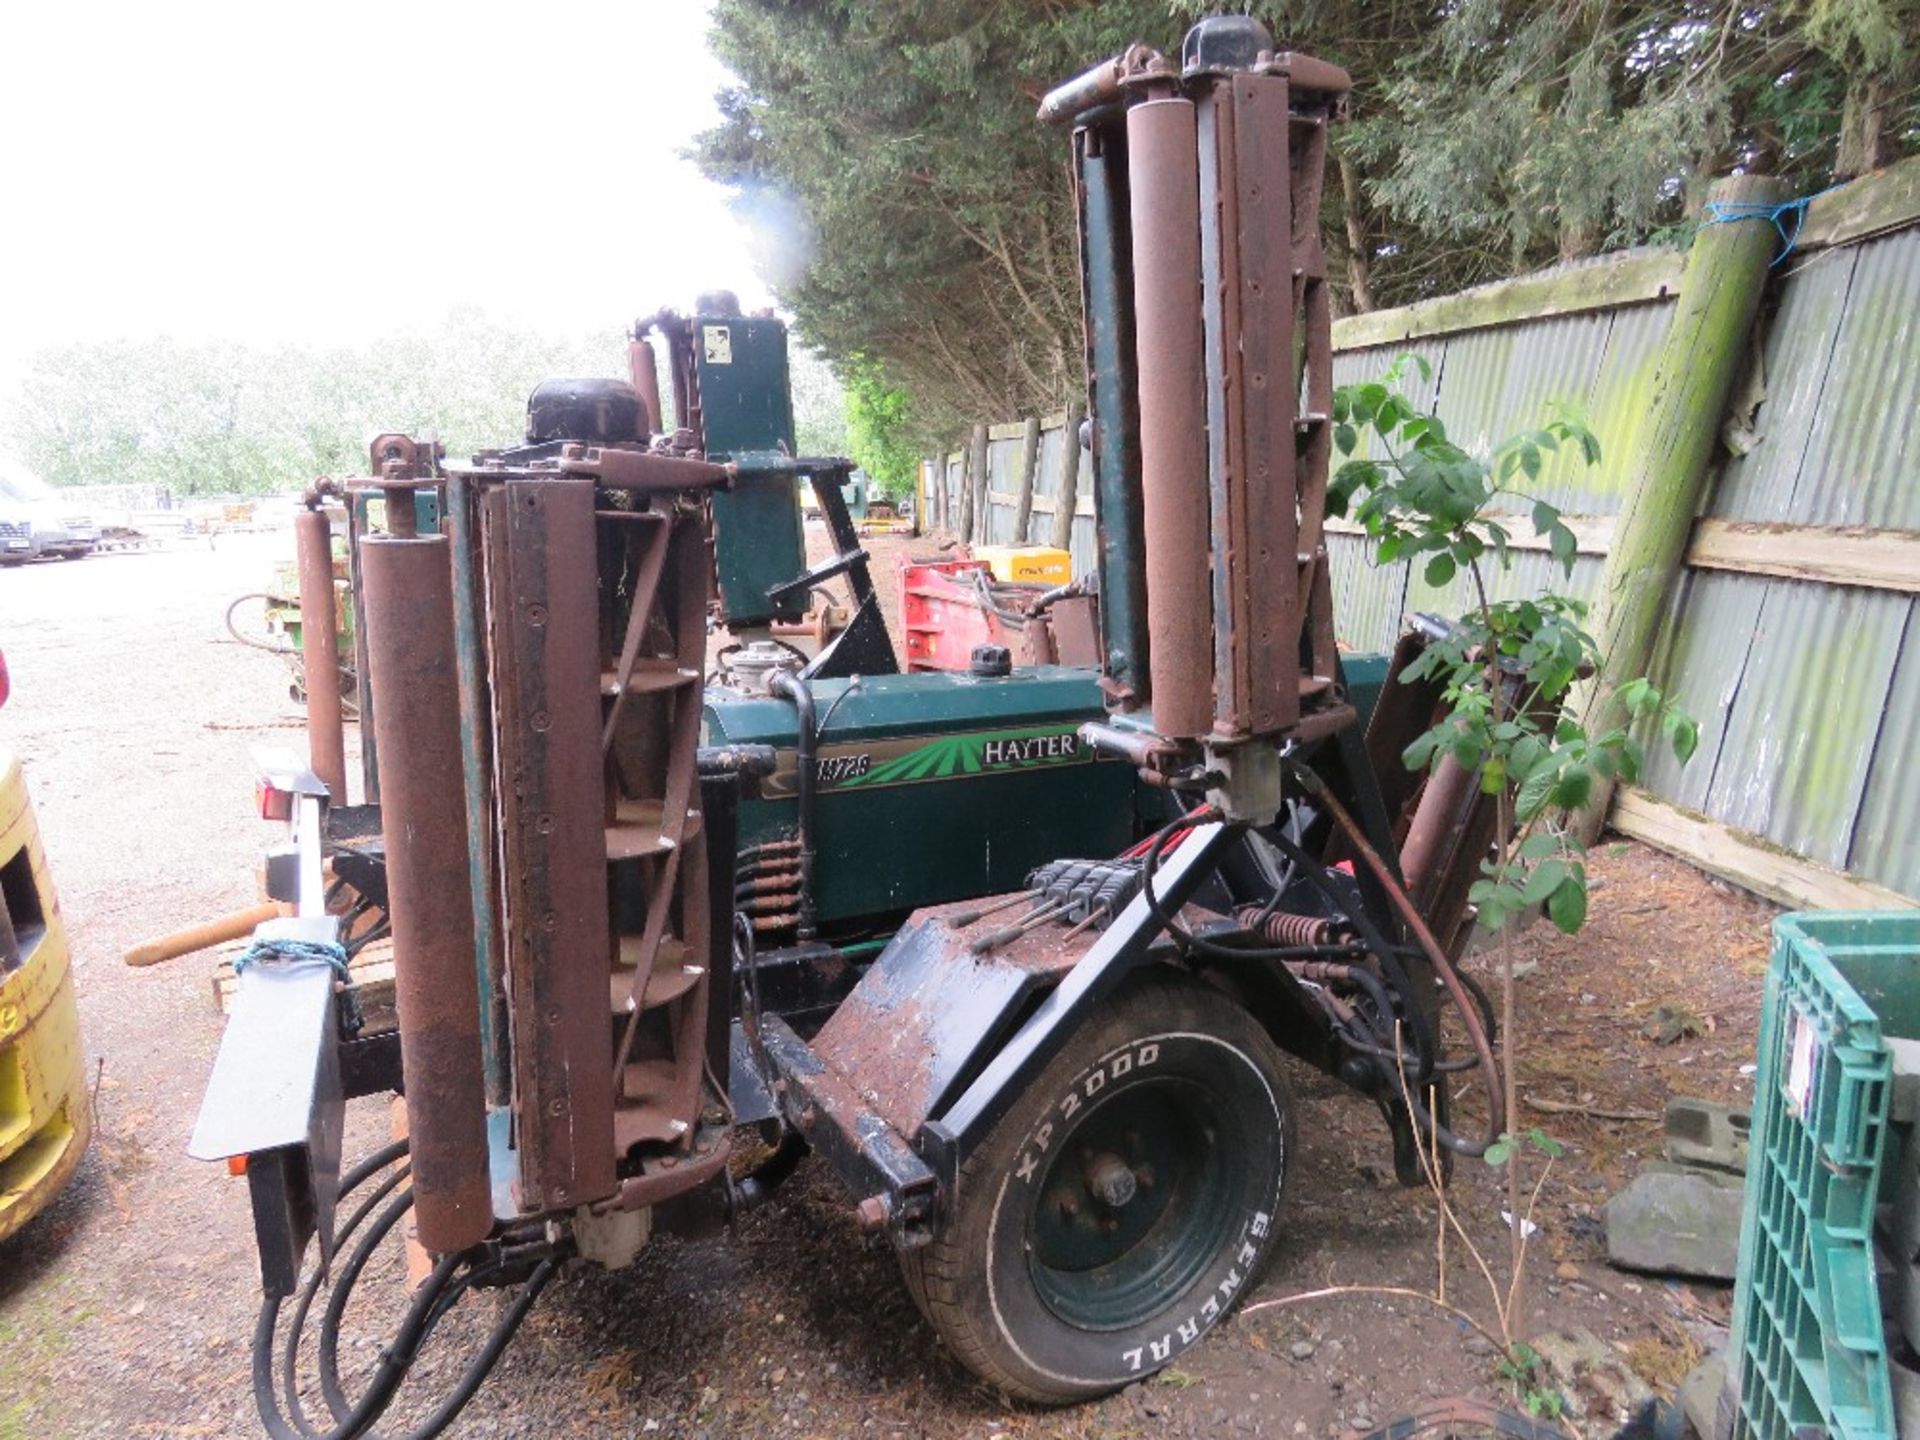 HAYTER TM729 TOWED GHAYTER TM729 TOWED G HAYTER TM729 TOWED GANG MOWER SET, PREVIOUS COUNCIL USEAGE. - Image 4 of 6